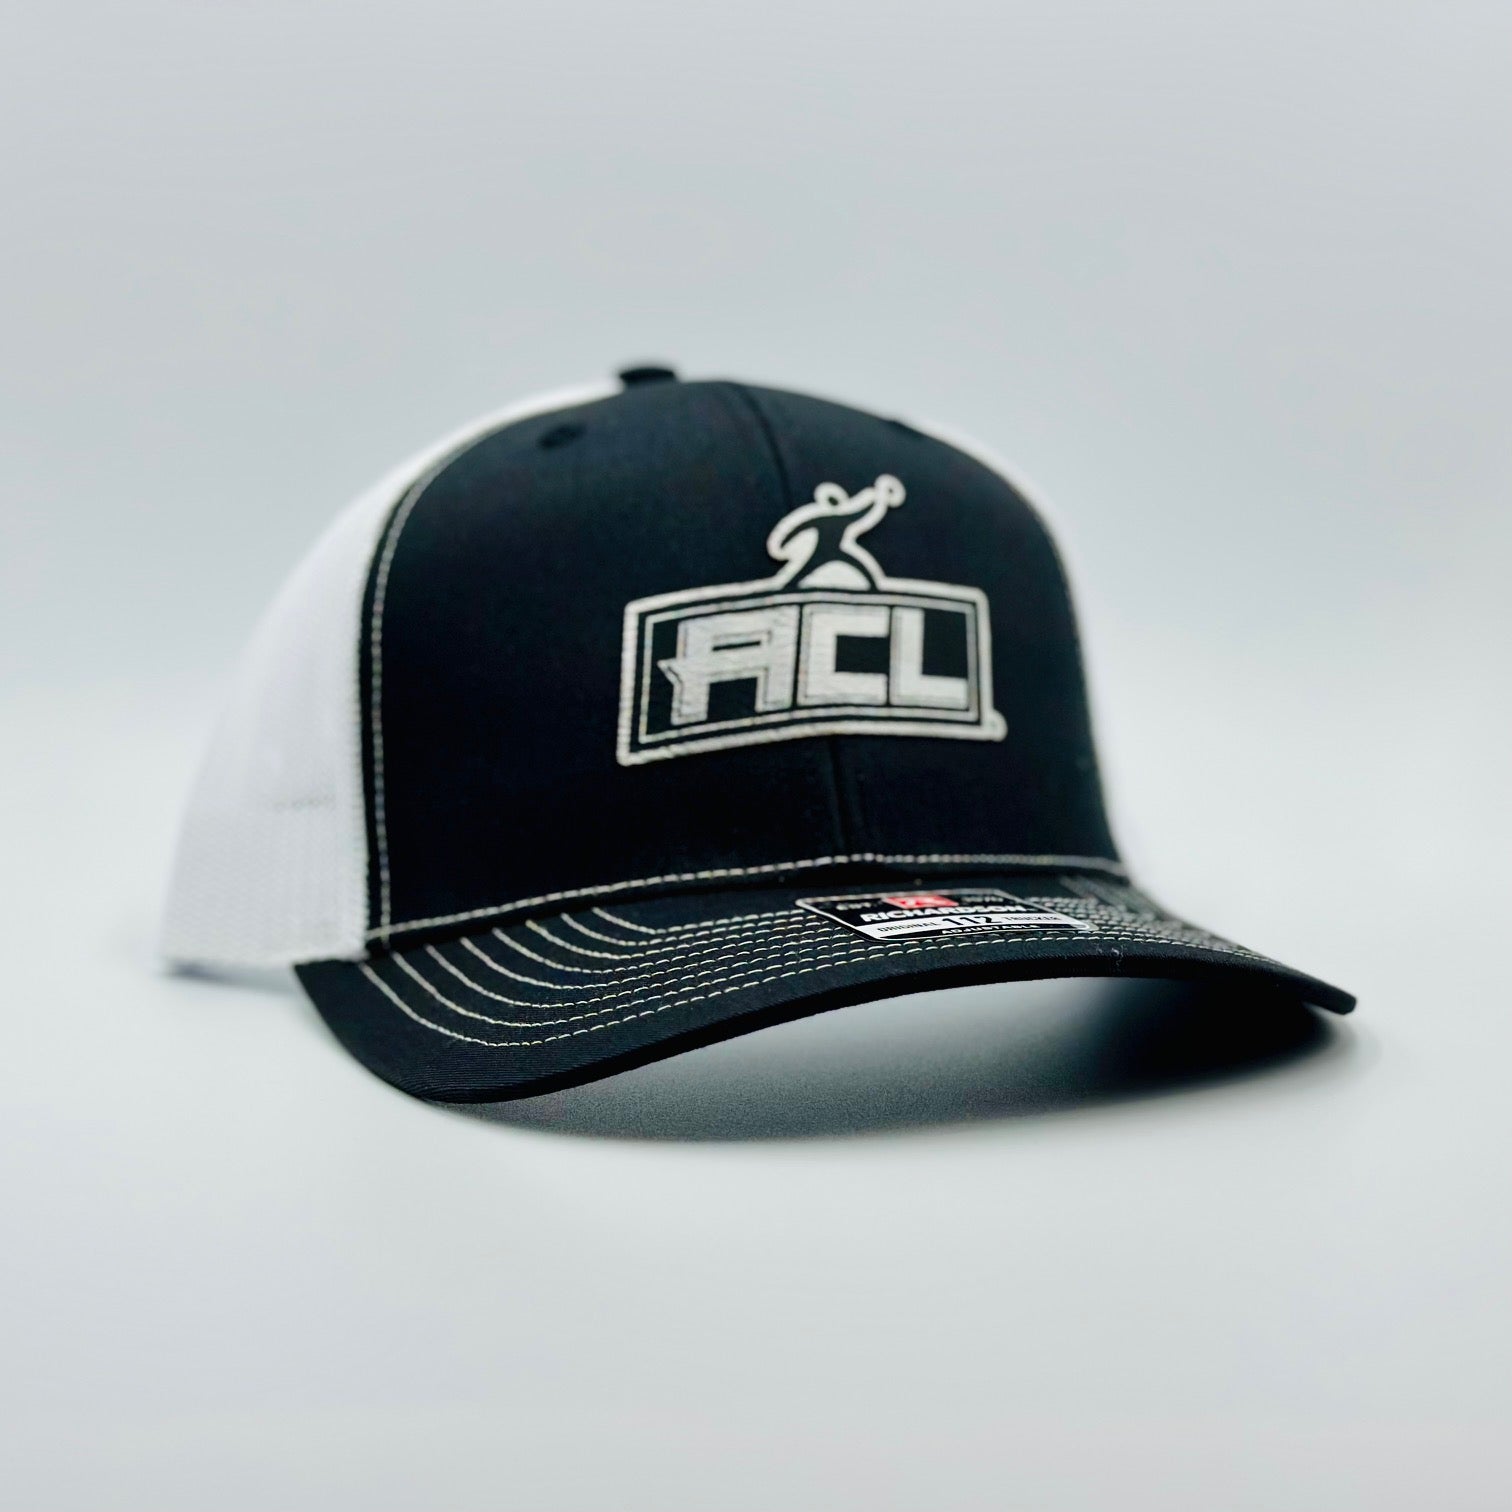 Black/White Hat With Sliver Patch